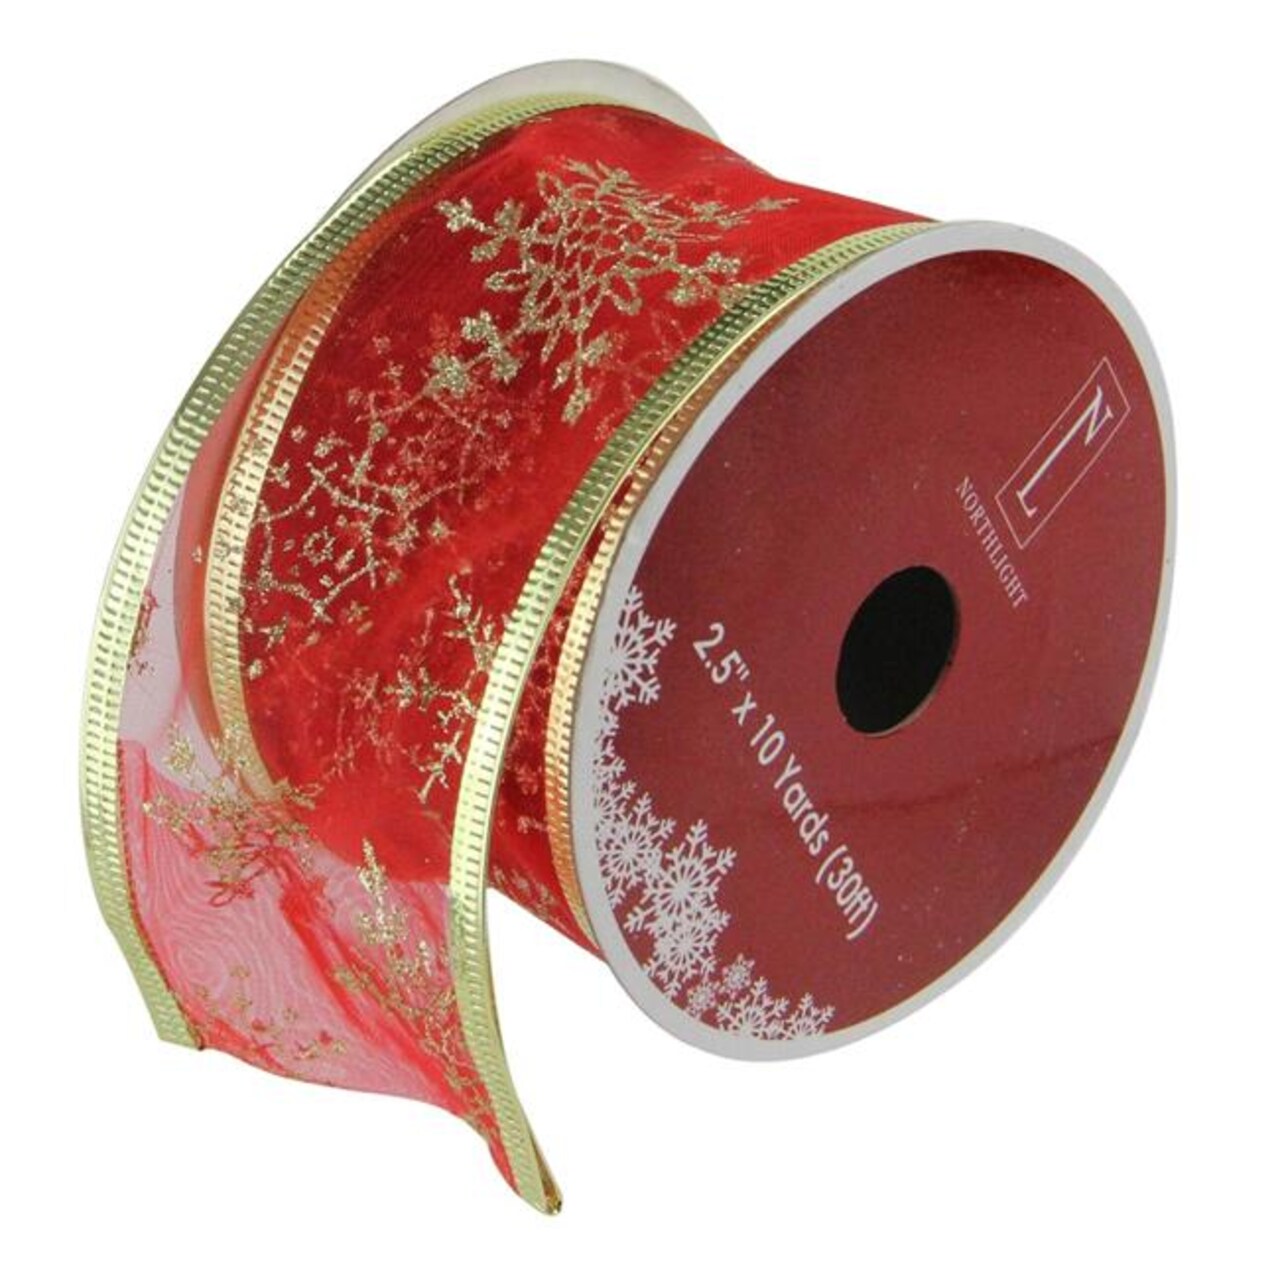 Northlight 32620350 2.5 in. x 10 Yards Cranberry Red &#x26; Gold Glitter Snowflakes Wired Christmas Craft Ribbon